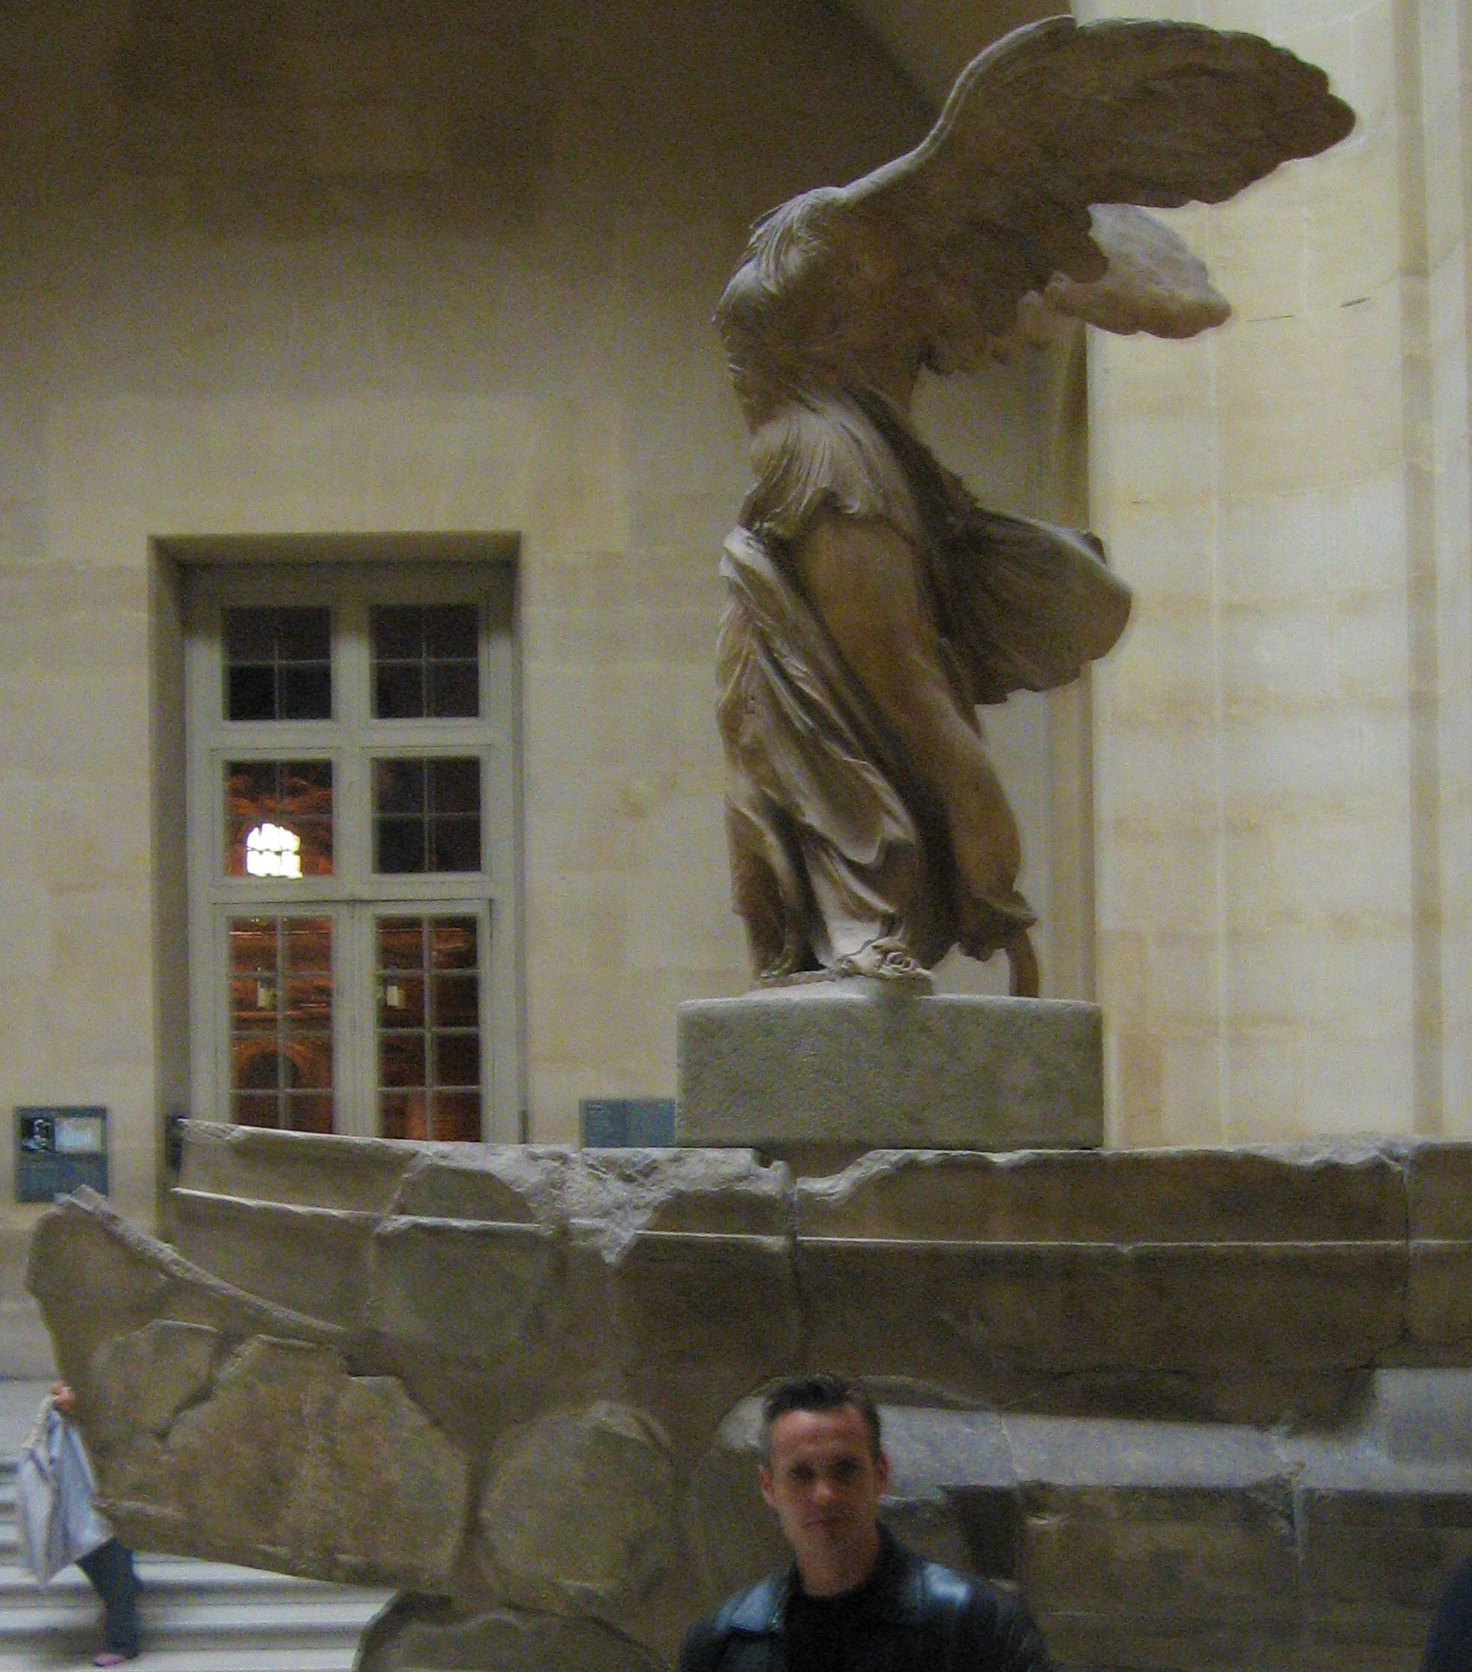 Louvre on a Wednesday night + Victory at Samothrace!